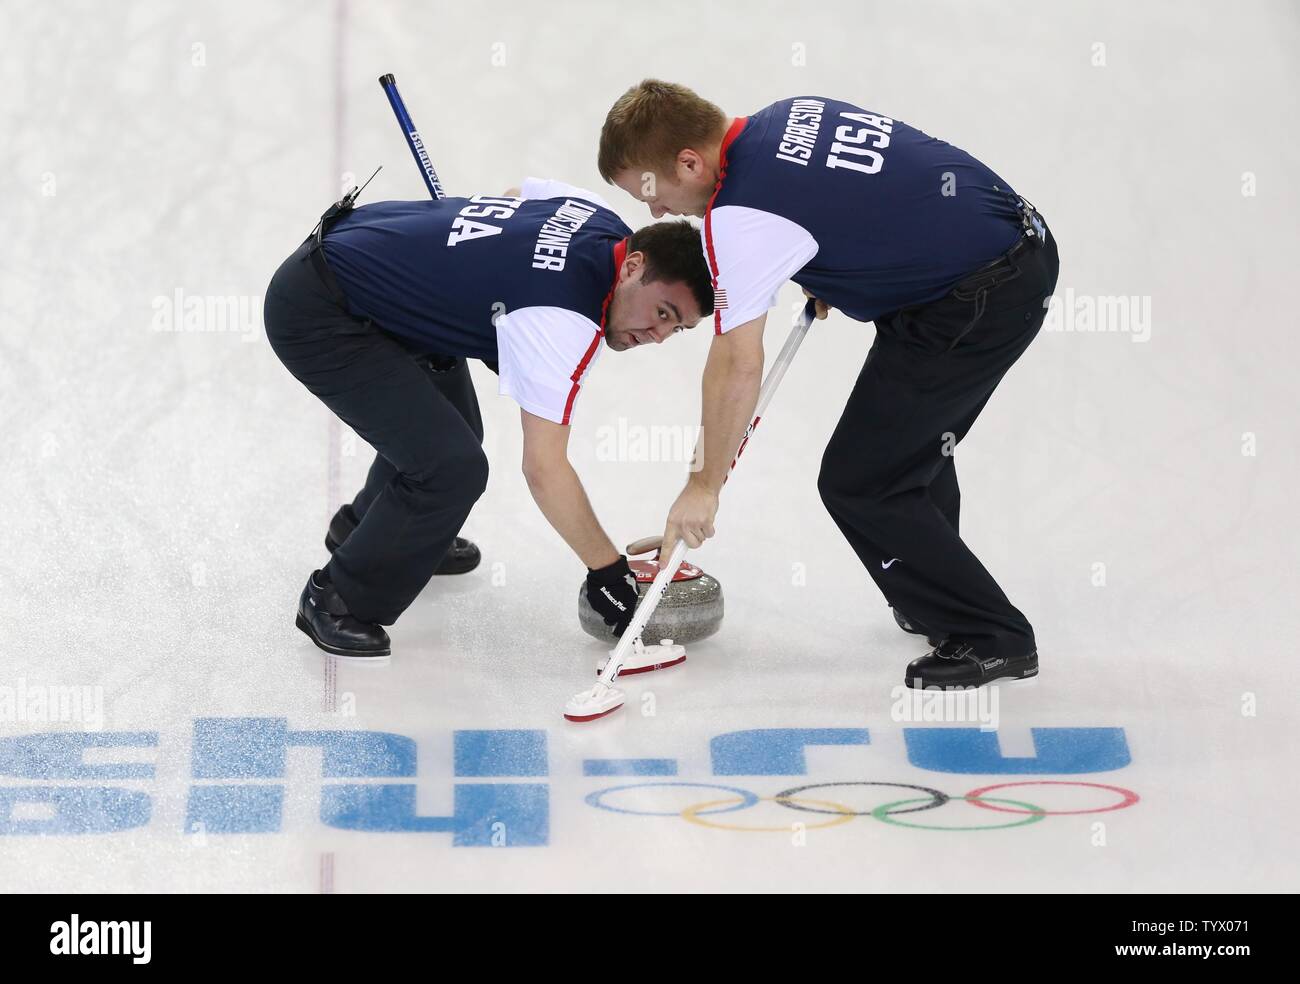 Americans Jeff Isaacson (right) and John Landsteiner sweep during their men's round robin session 2 curling against Norway during the Sochi 2014 Winter Olympics on February 10, 2014 in Sochi, Russia.   UPI/Molly Riley Stock Photo